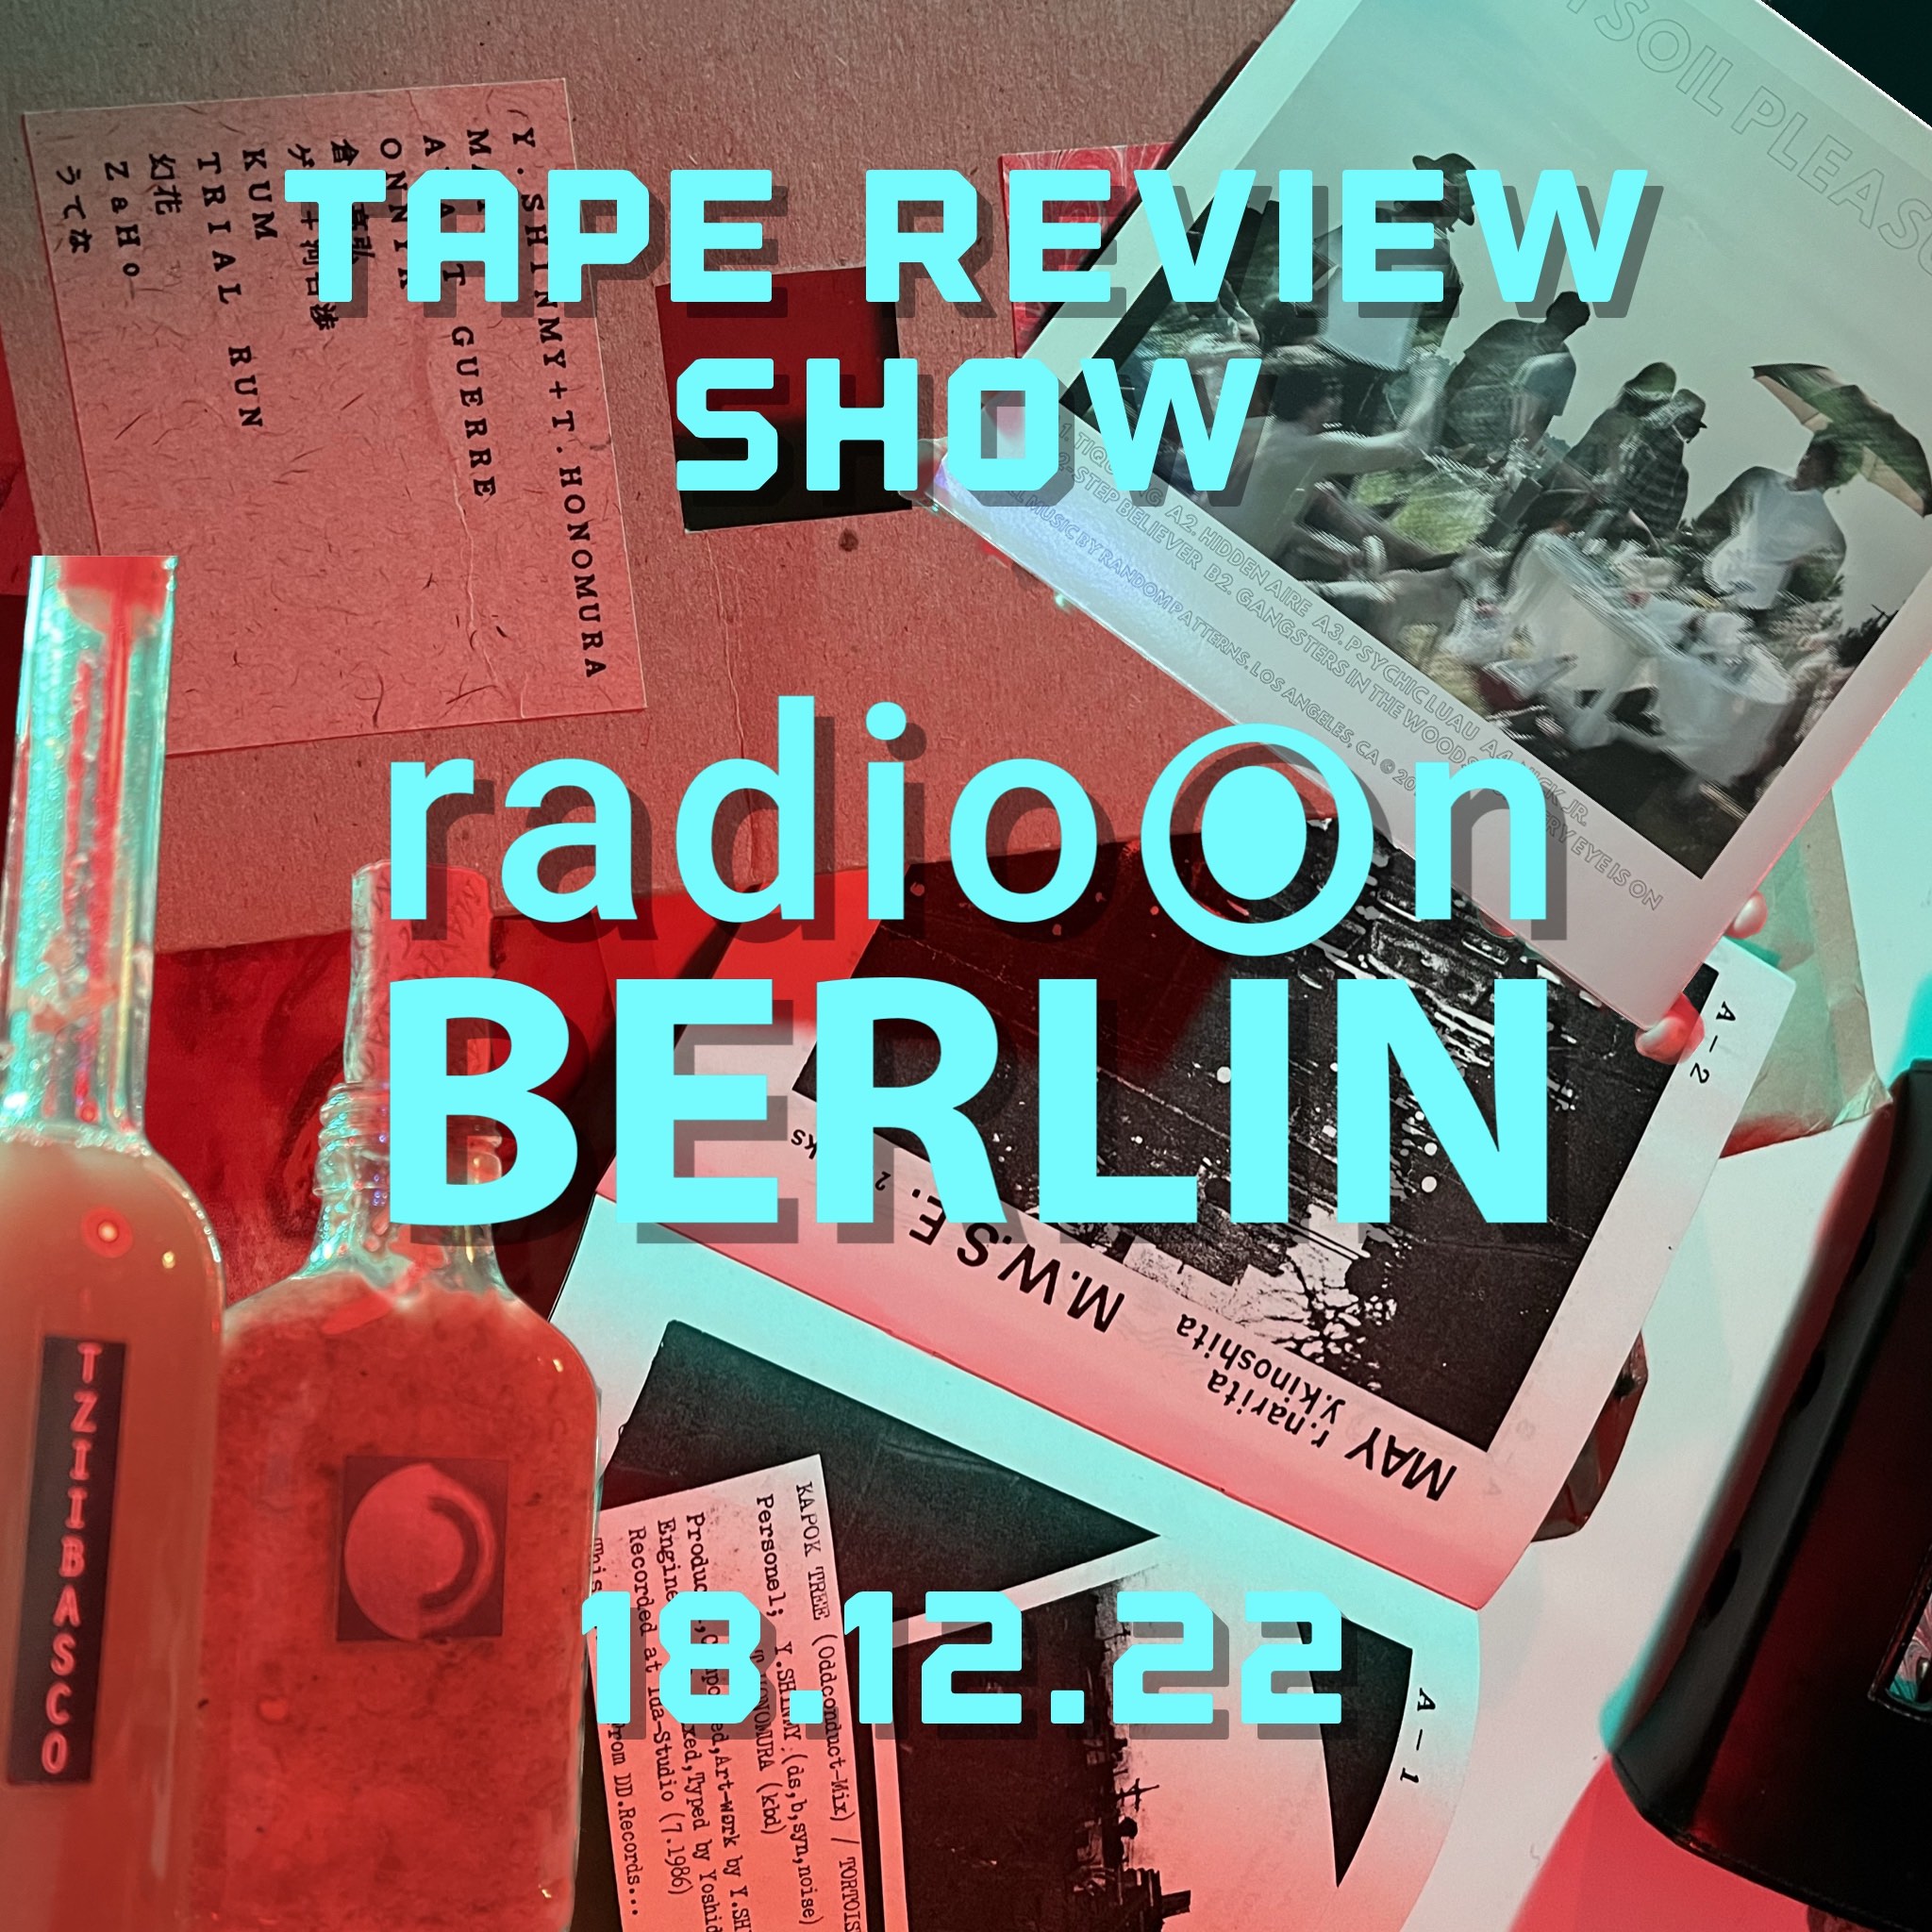 The Tape Review Show – Random Patterns, Trial Run Tapes + 20 years of Night on Earth